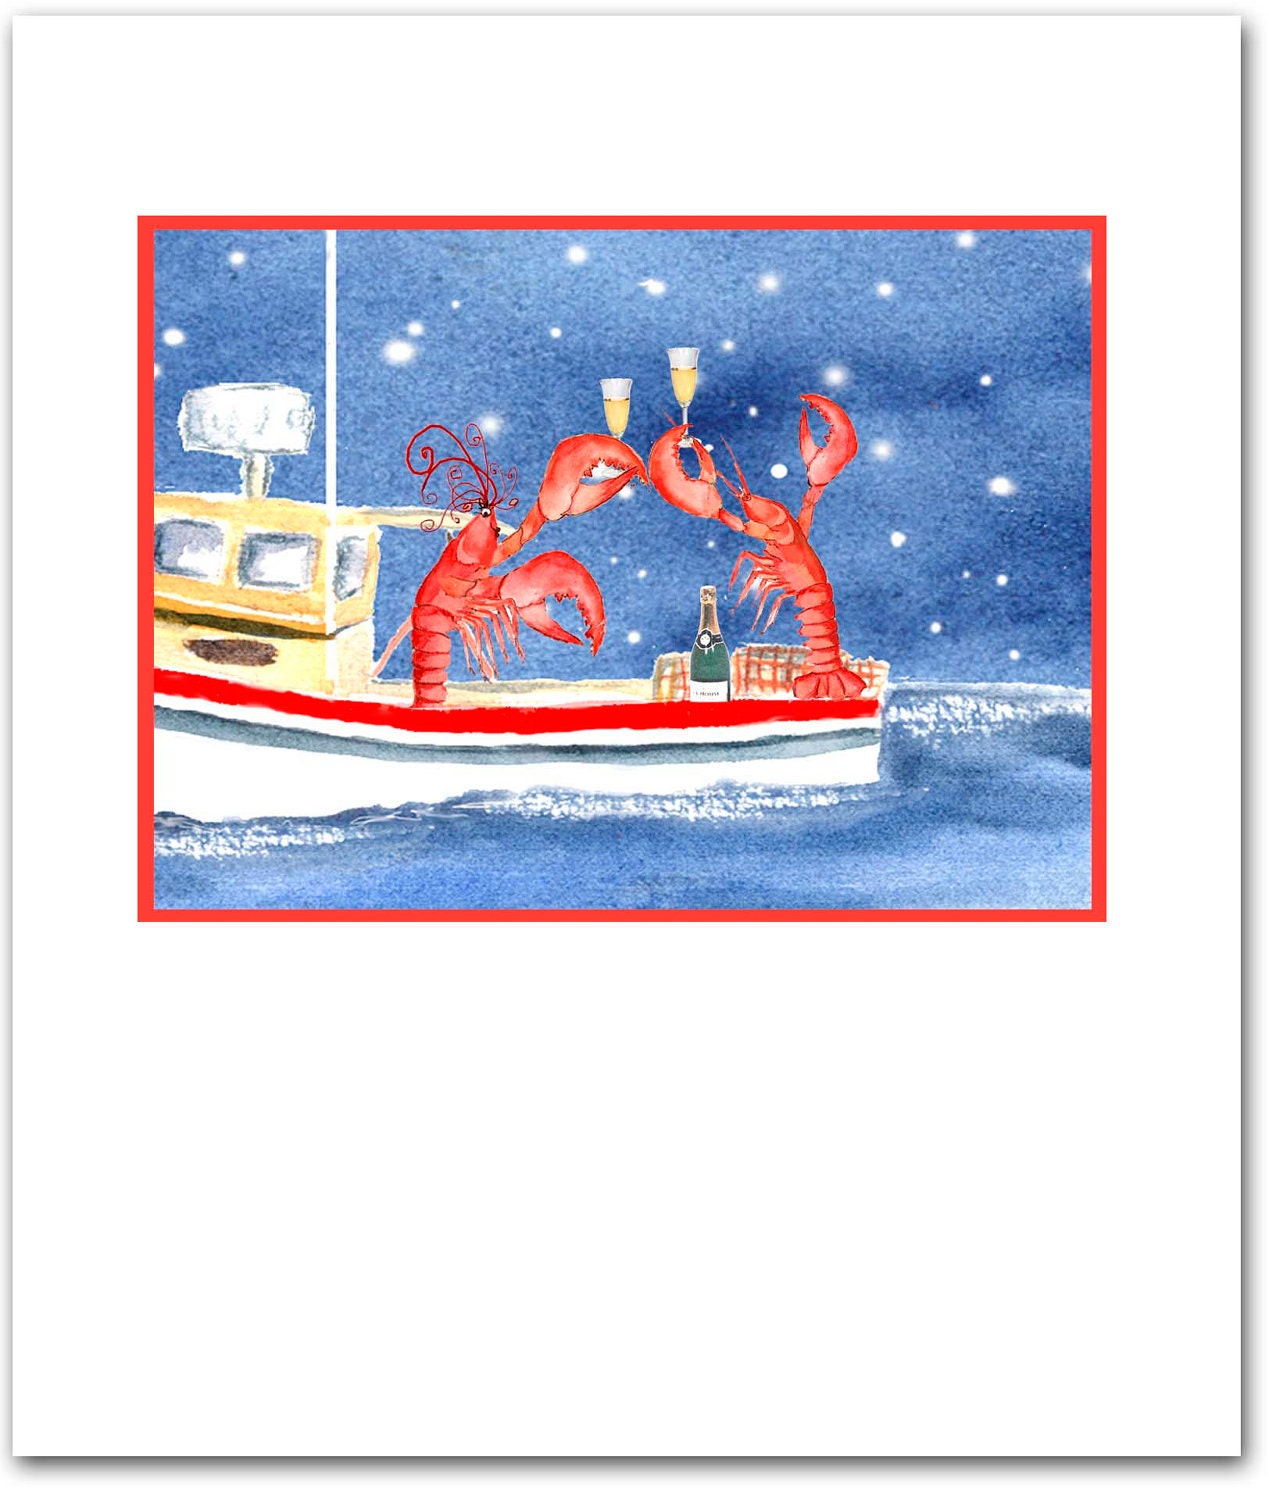 Celebrating Lobsters Christmas cards. set of 10. boxed set.